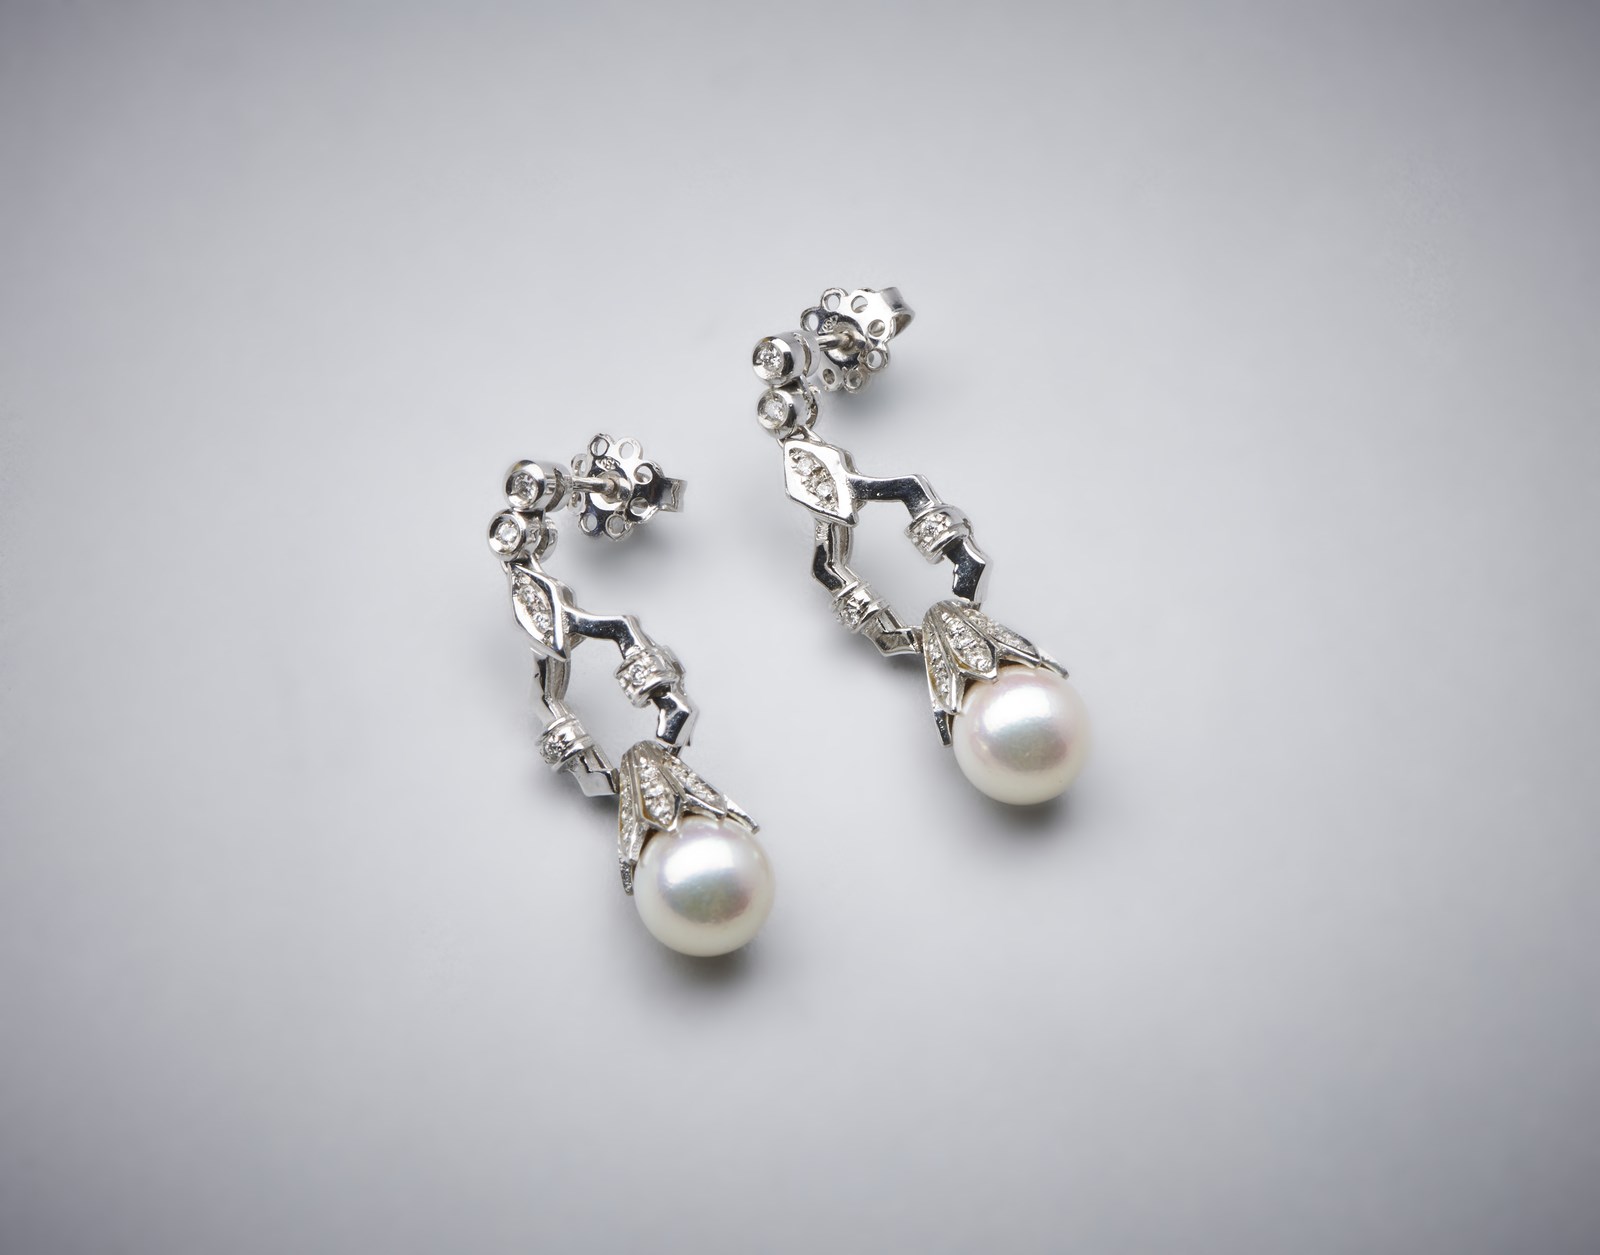 Pendant earrings in 750/1000 white gold with a pair of 8.50 mm white cultured spherical pearls and small white diamonds of a mixed cut of about 0.80 carats. (. )